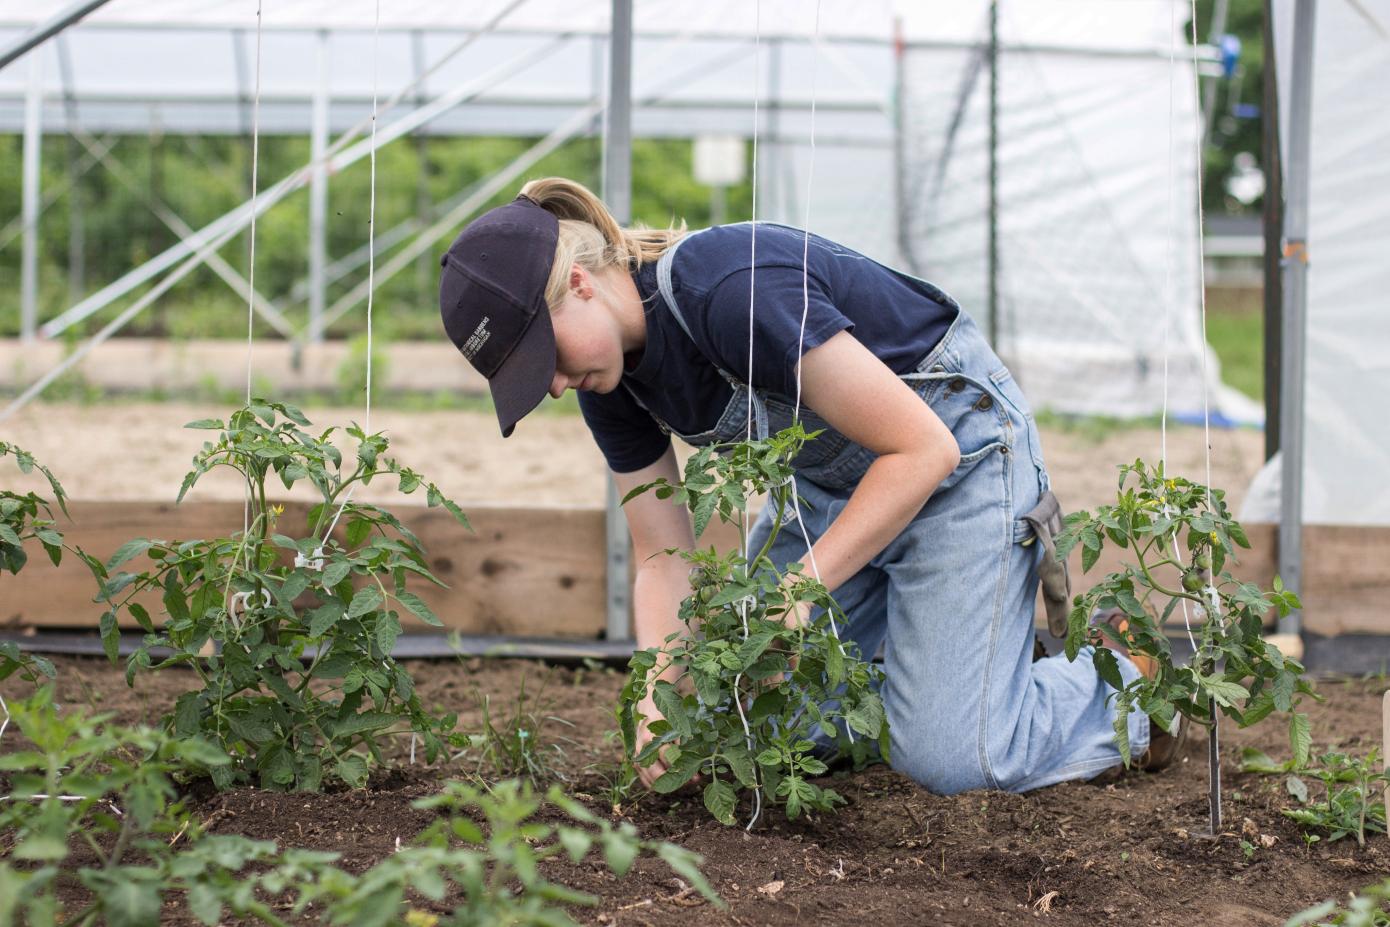 Student working with plants in a greenhouse